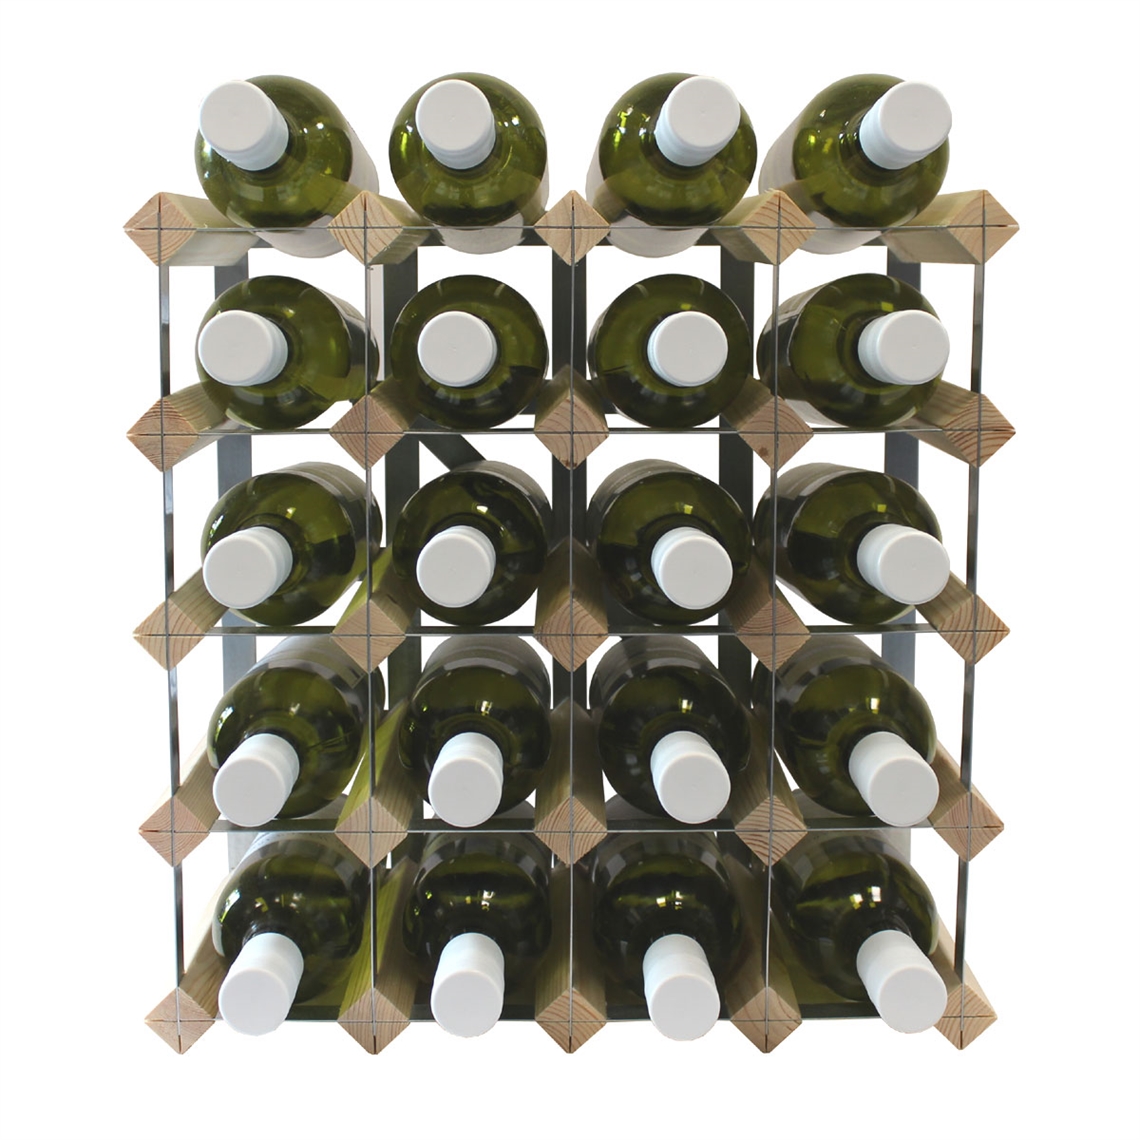 View more how to order a bespoke wine rack from our Assembled Wine Racks range